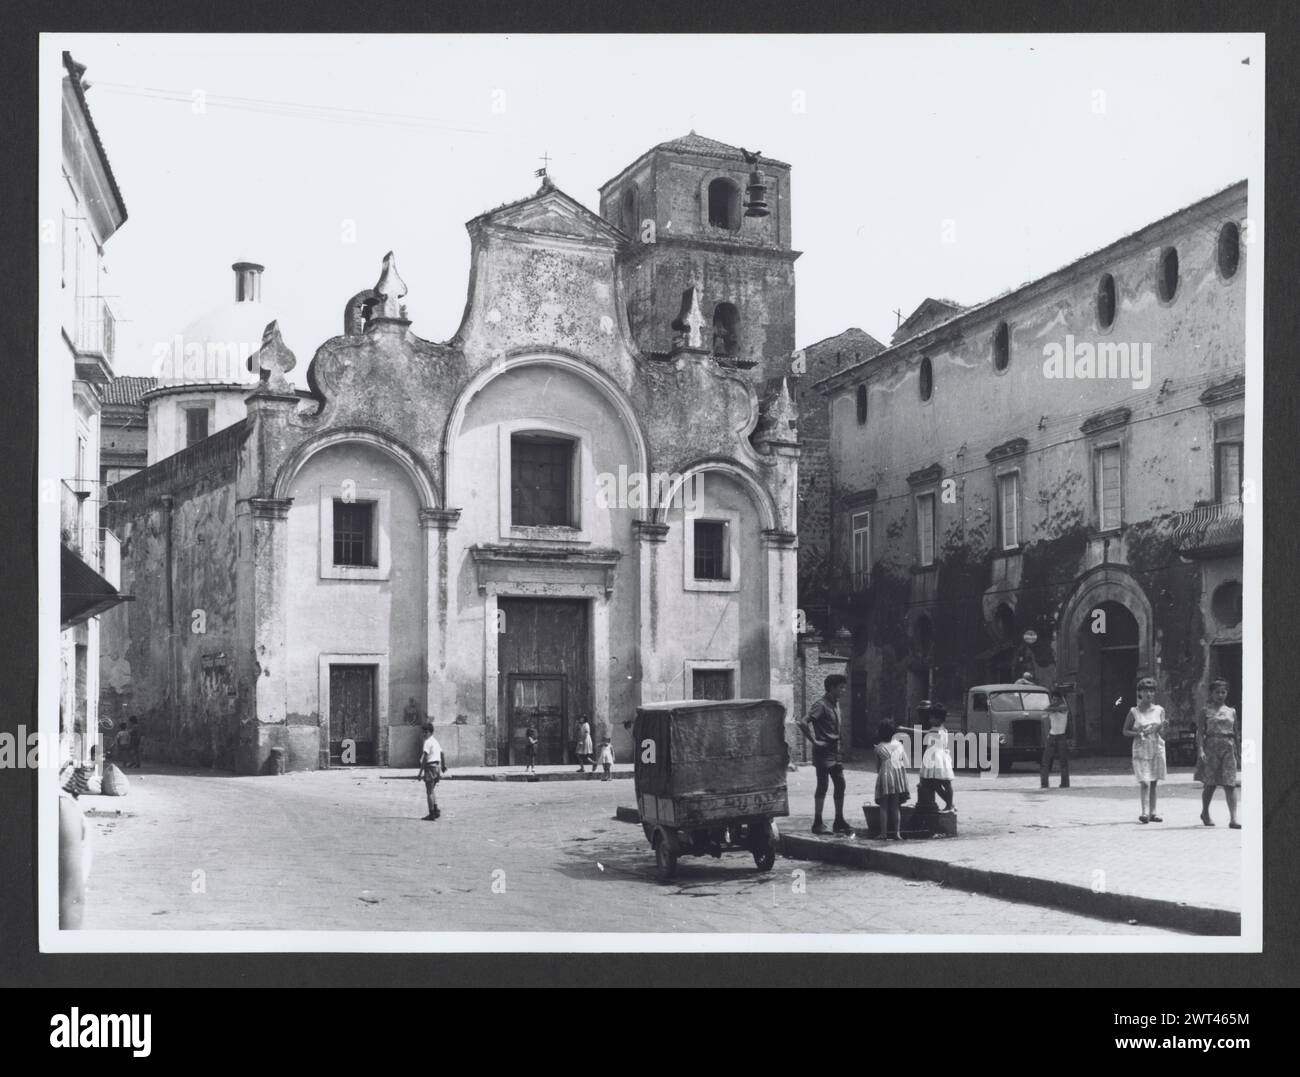 Campania Caserta Aversa S. Maria Maddalena. Hutzel, Max 1960-1990 Medieval: Architecture (13th century). Post-medieval: Architecture and architectural decoration (18th century); crucifix German-born photographer and scholar Max Hutzel (1911-1988) photographed in Italy from the early 1960s until his death. The result of this project, referred to by Hutzel as Foto Arte Minore, is thorough documentation of art historical development in Italy up to the 18th century, including objects of the Etruscans and the Romans, as well as early Medieval, Romanesque, Gothic, Renaissance and Baroque monuments. Stock Photo